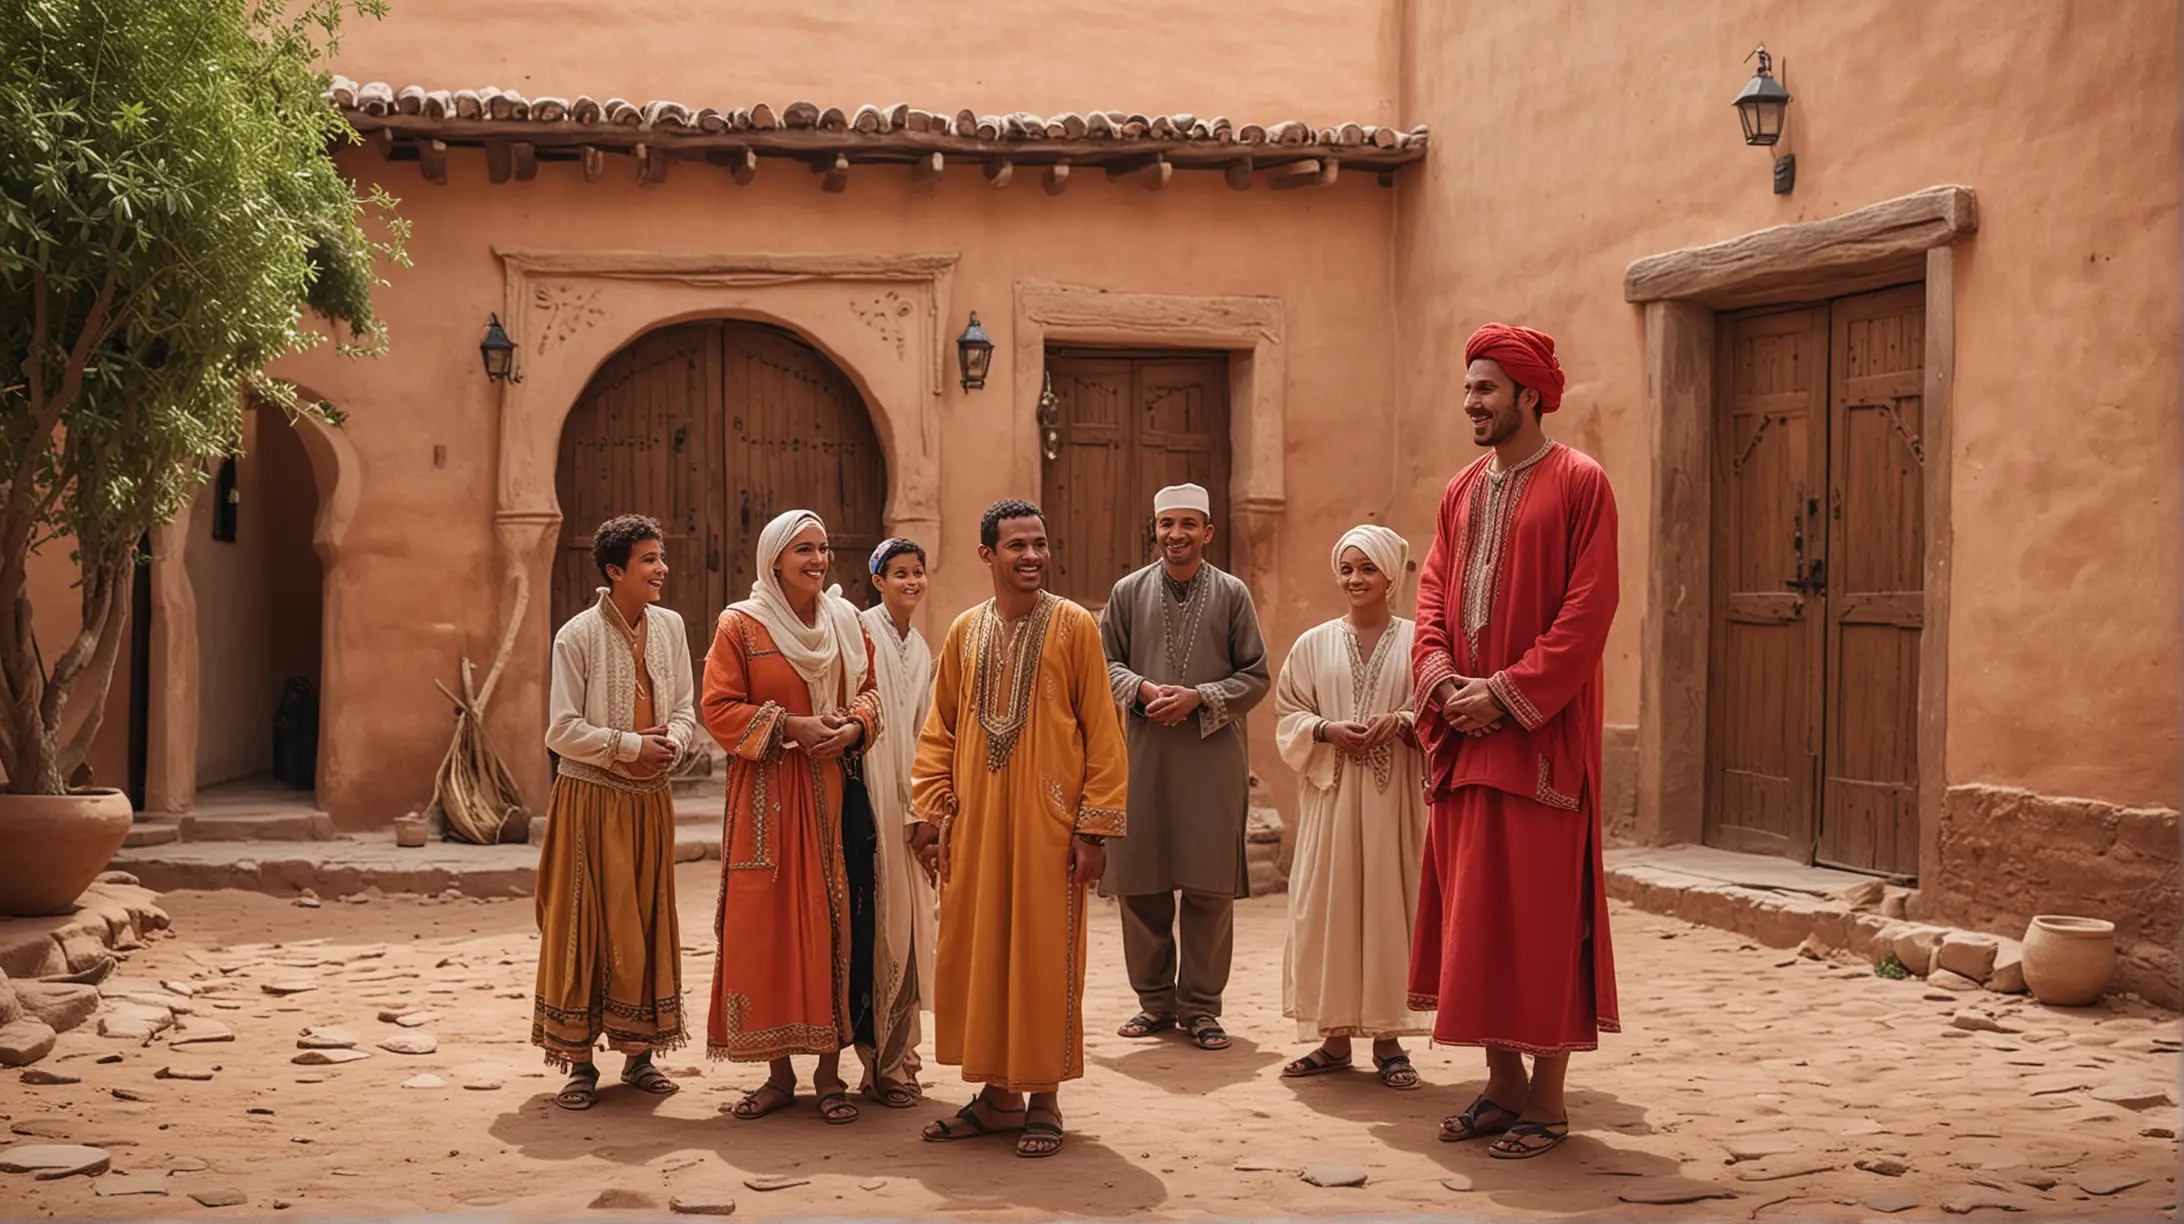 Moroccan traditional musician meeting his family in front of a traditional house in a Moroccan traditional village after a long journey. All are happy, all wearing traditional dresses., very realistic, dawn., wearing traditional clothes.